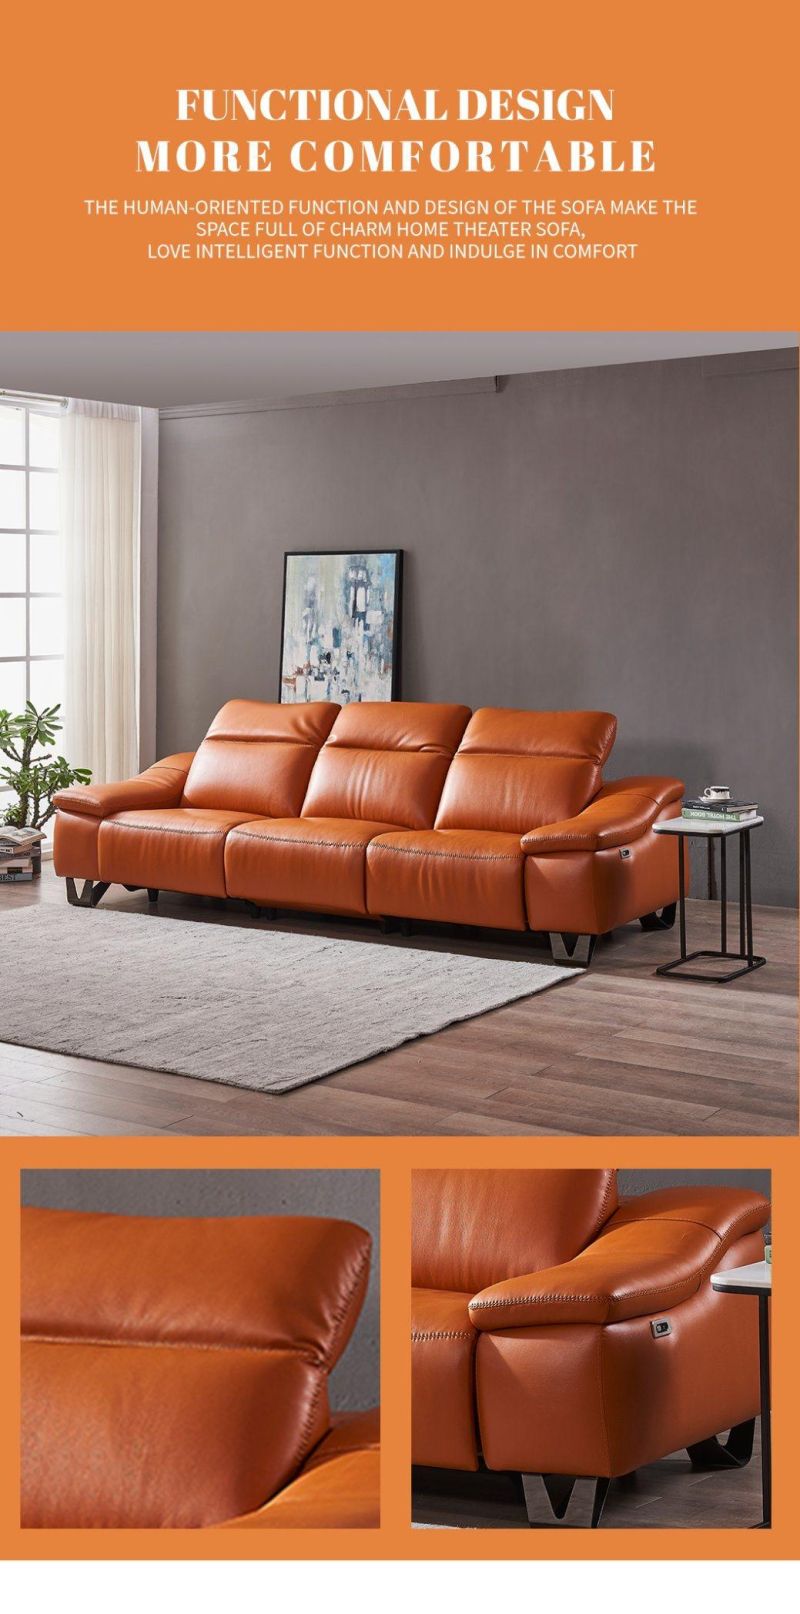 Simple PVC Functional Sofa Electric Multi-Functional First Class Sofa Bed Down Small Modular Sofa